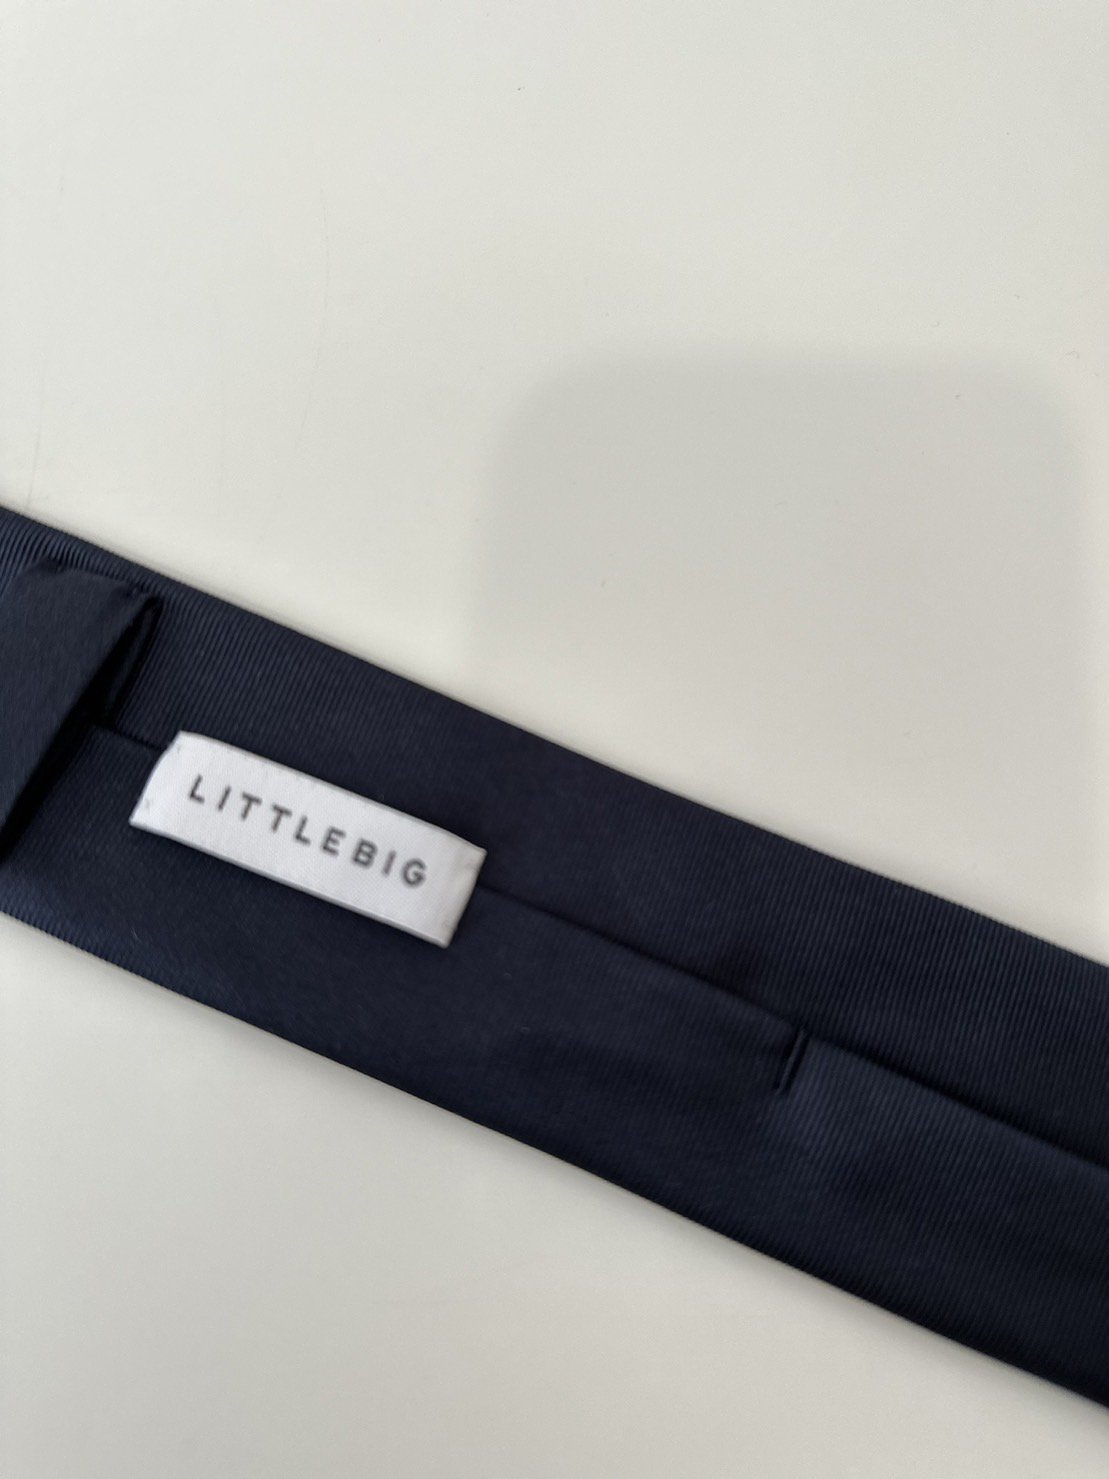 LITTLEBIG<br />Narrow Tie / Navy<img class='new_mark_img2' src='https://img.shop-pro.jp/img/new/icons14.gif' style='border:none;display:inline;margin:0px;padding:0px;width:auto;' />